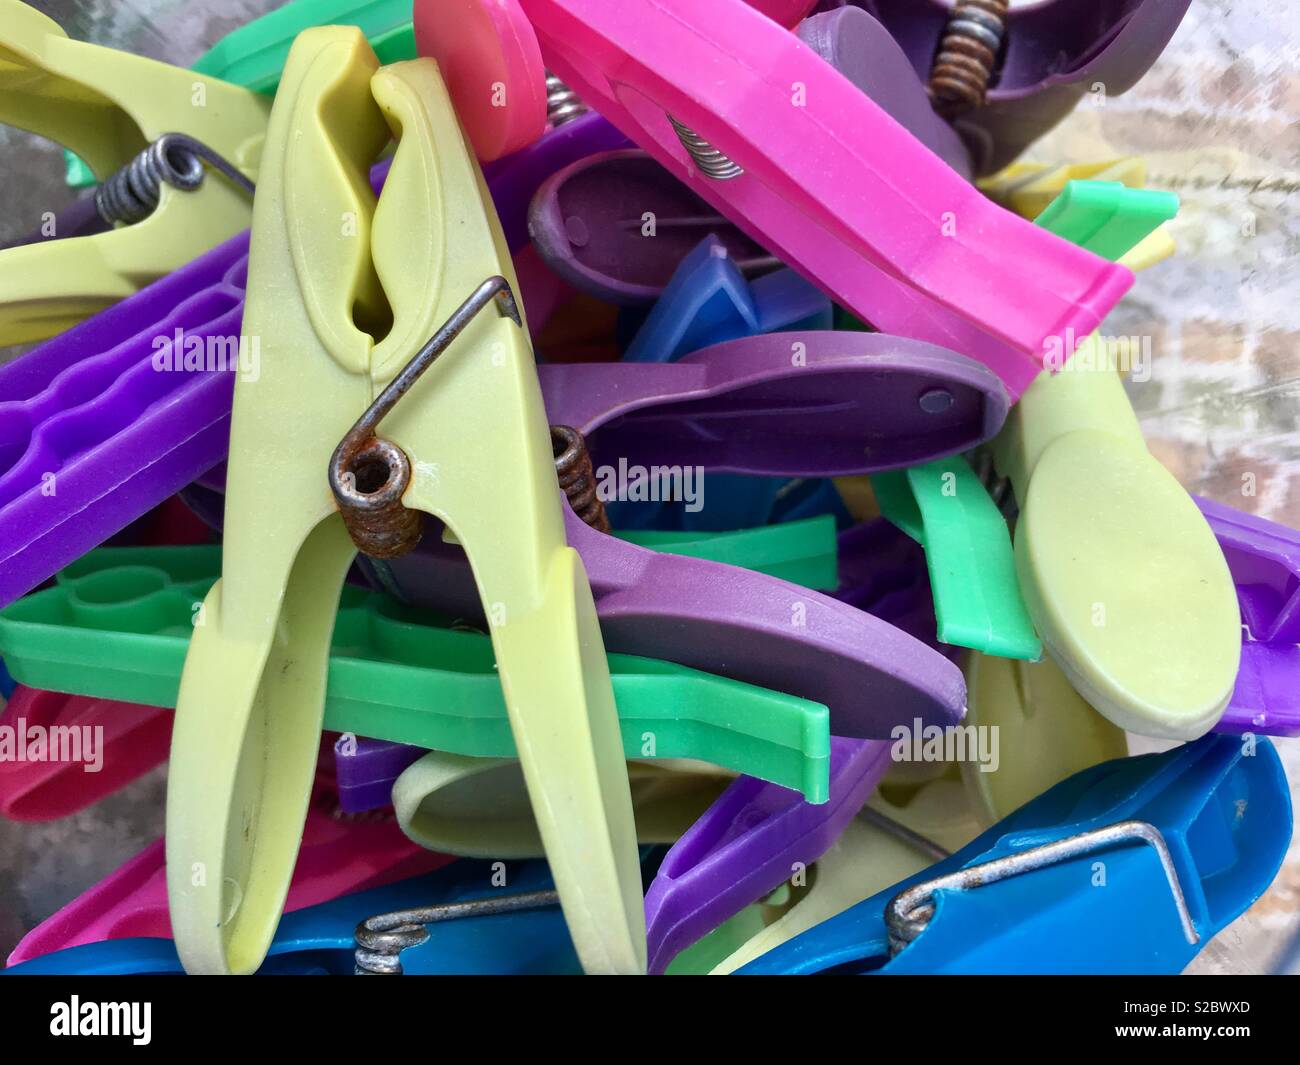 Plastic clothes pegs in bright colours Stock Photo